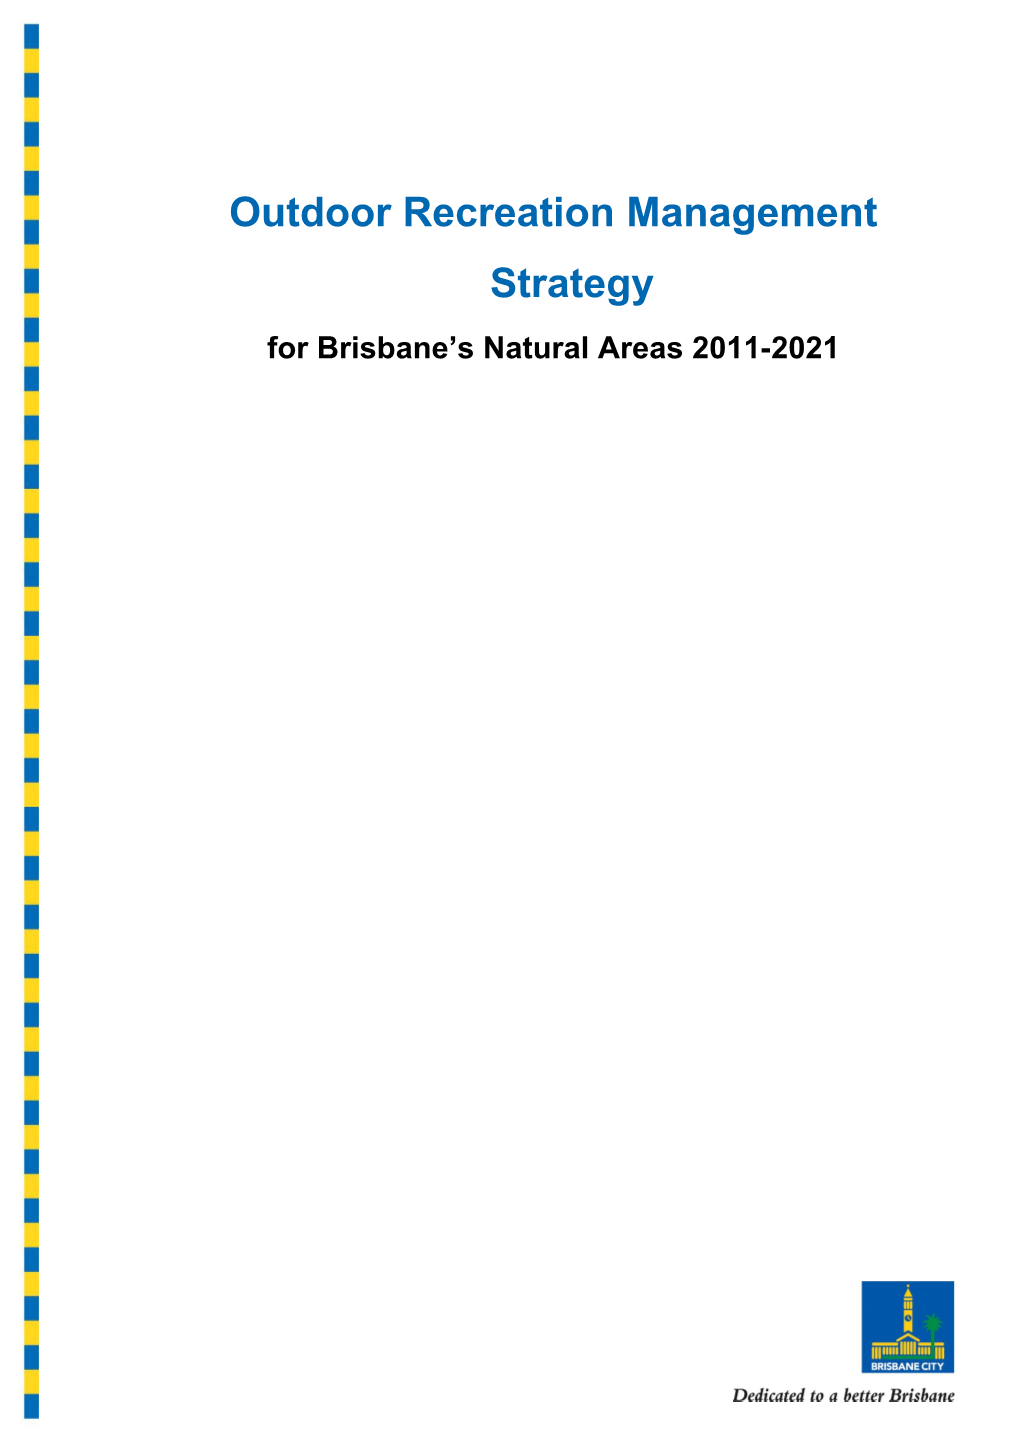 Outdoor Recreation Management Strategy